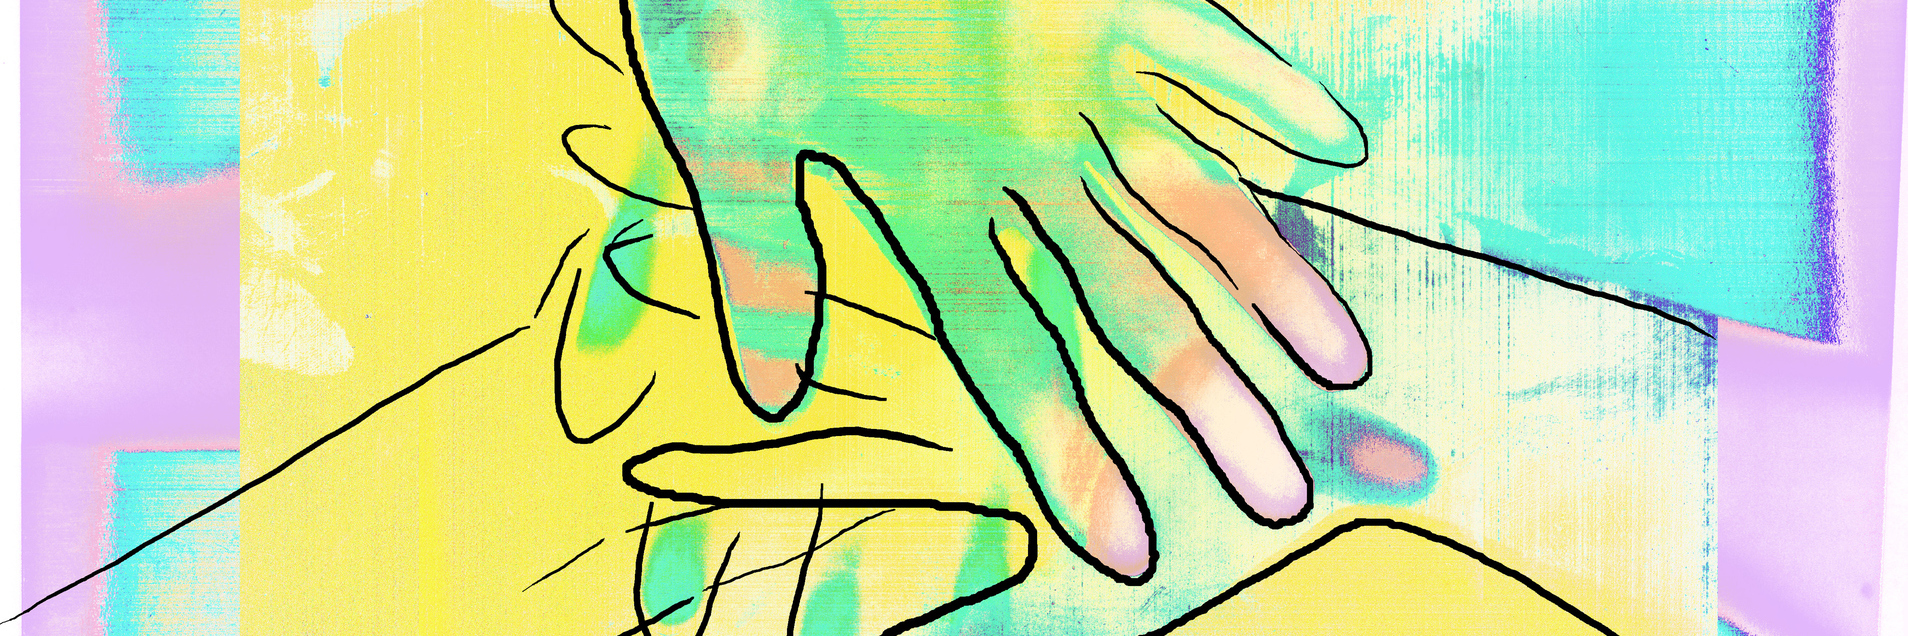 drawing of overlapping hands on colorful background